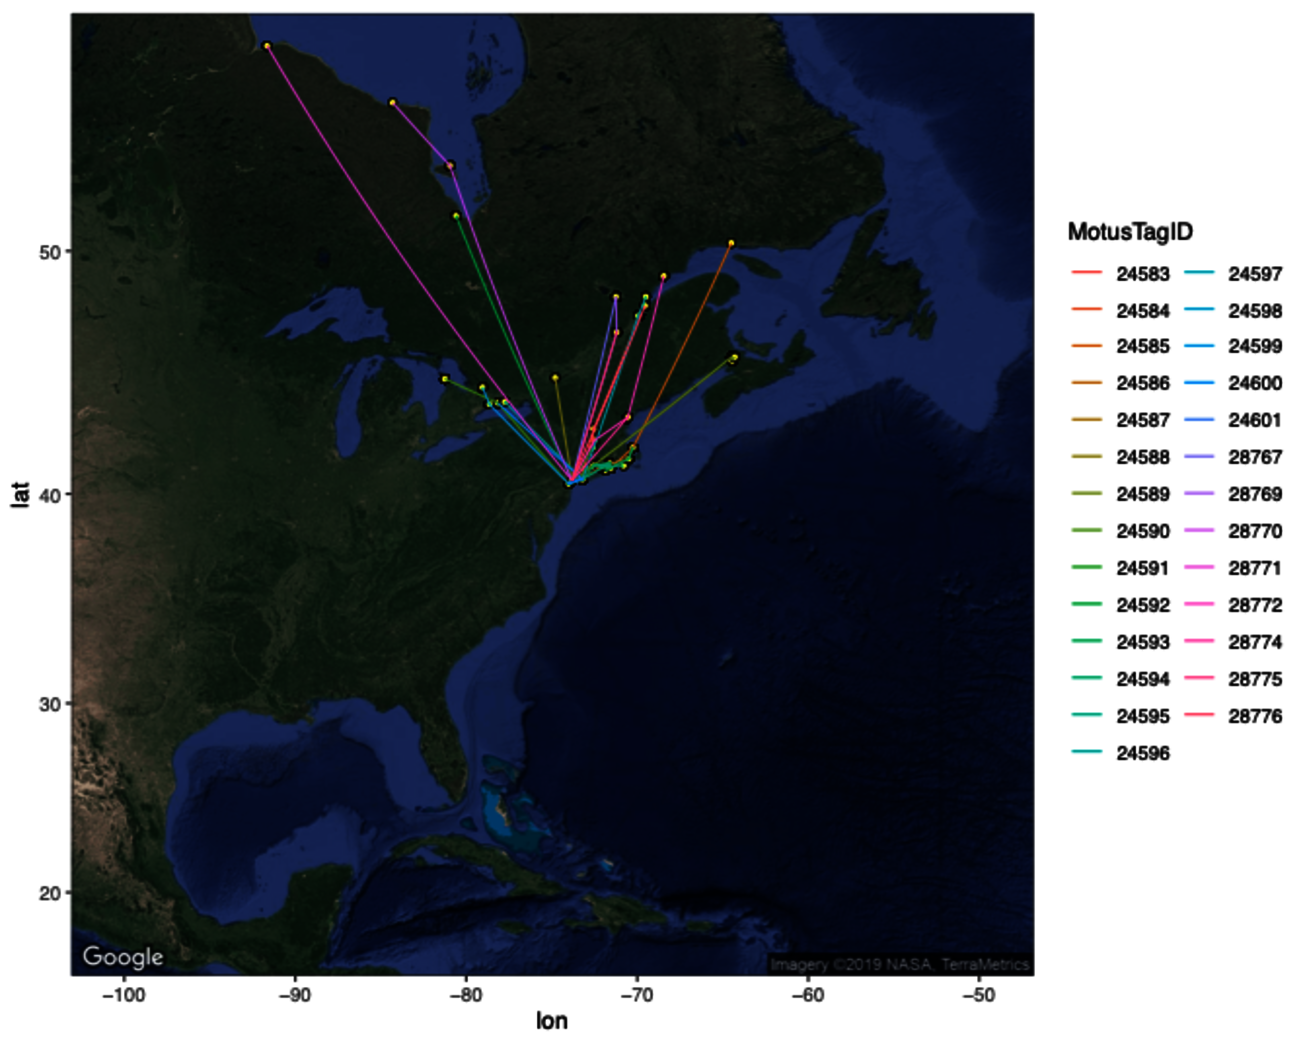 Spring migration tracks of 27 Semipalmated Sandpipers nanotagged in Jamaica Bay in 2017 and 2018. Birds were detected flying inland along the Connecticut River, along the coast of Long Island Sound and Cape Cod, and eventually at locations in Canada including Lake Ontario, the St. Lawrence River, the Bay of Fundy, Ottawa, and Hudson Bay. Photo: NYC Audubon